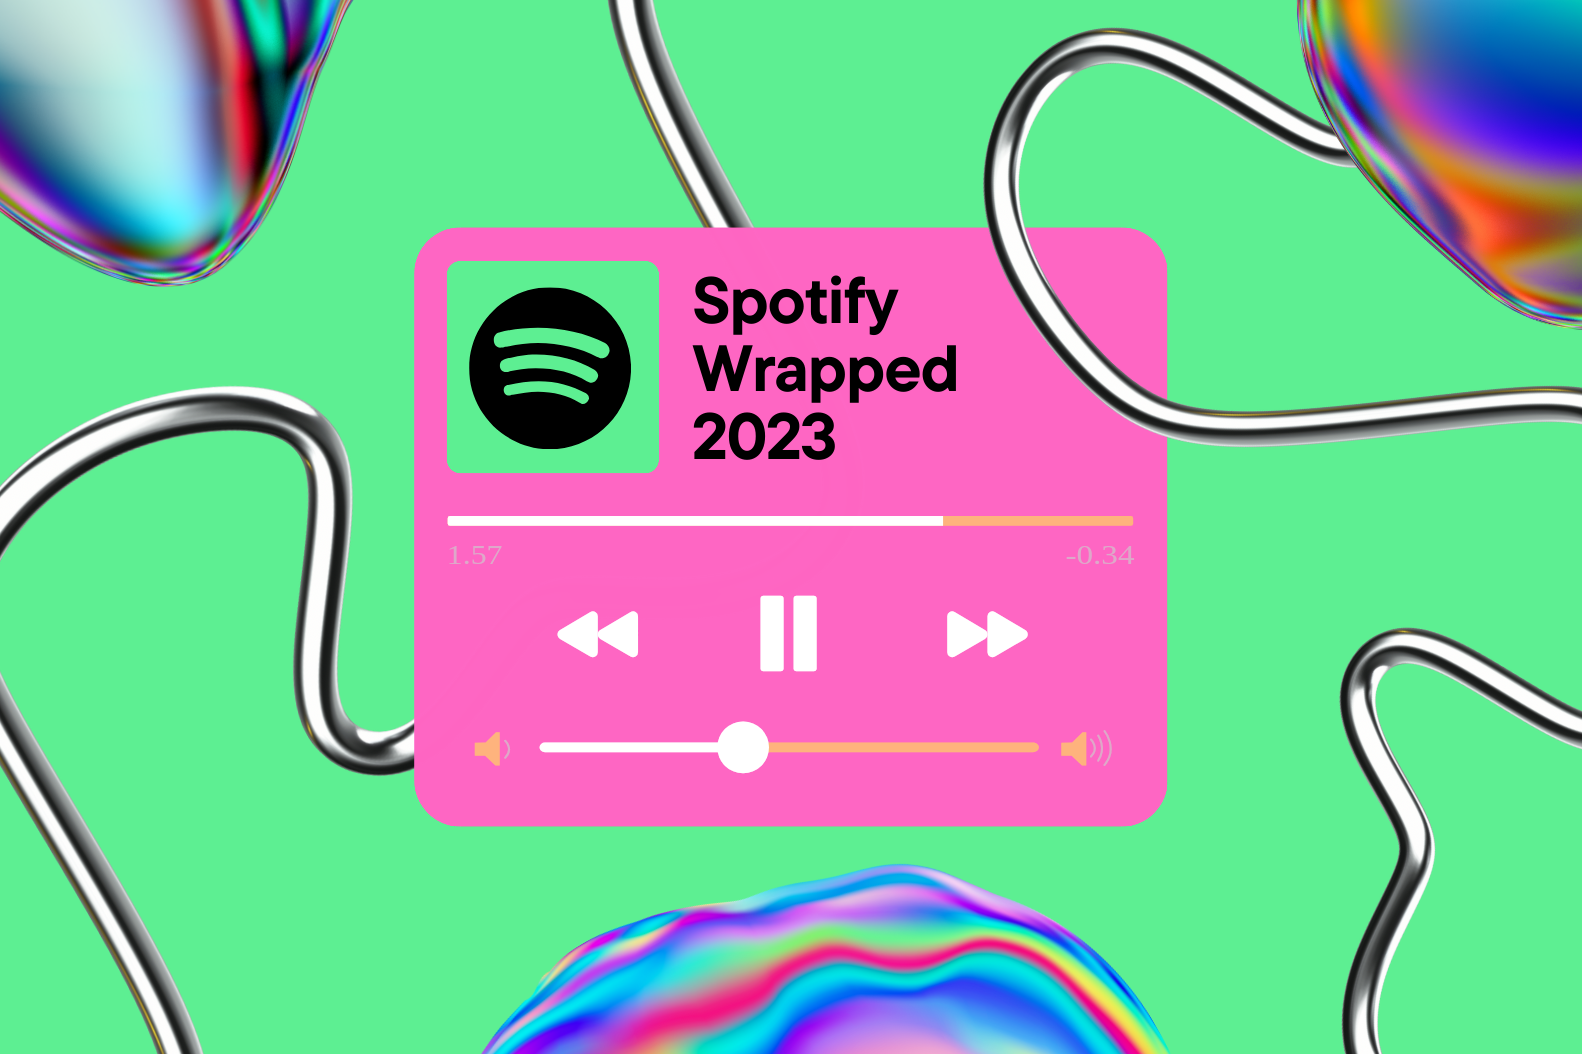 Spotify Wrapped Fun and harmless insights or an insidious trend?